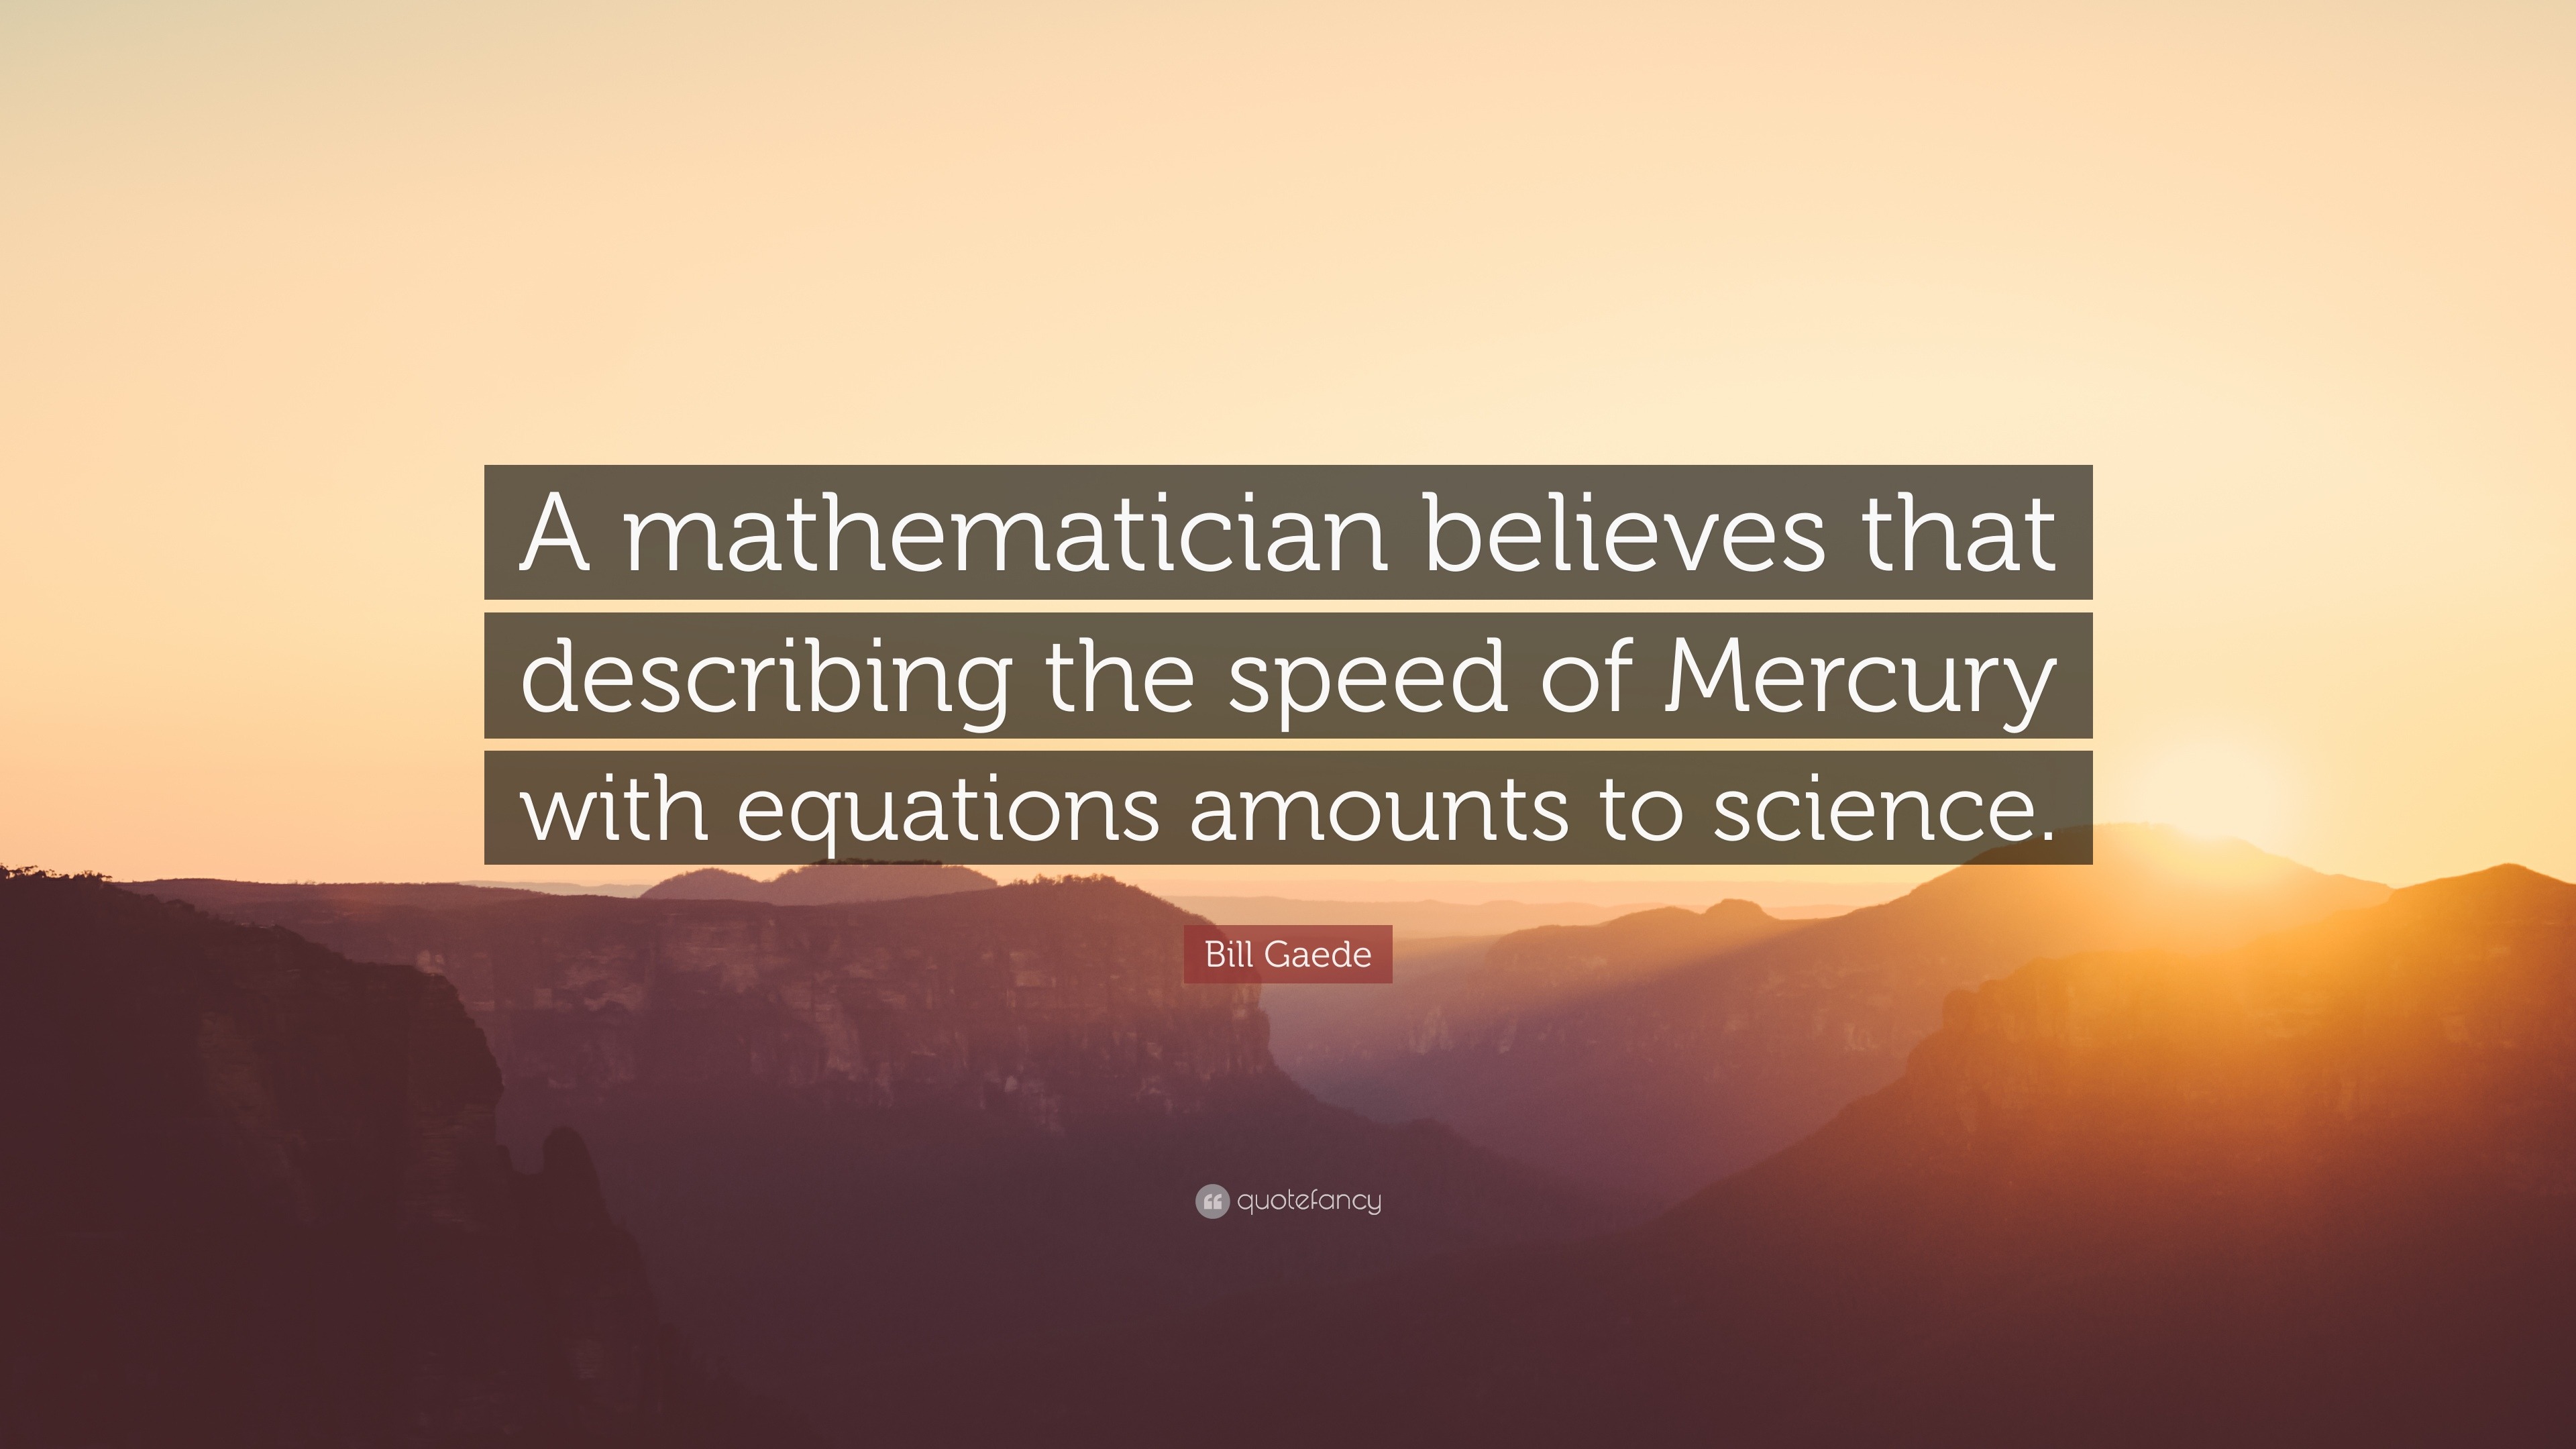 Bill Gaede Quote “A mathematician believes that describing the speed of Mercury with equations